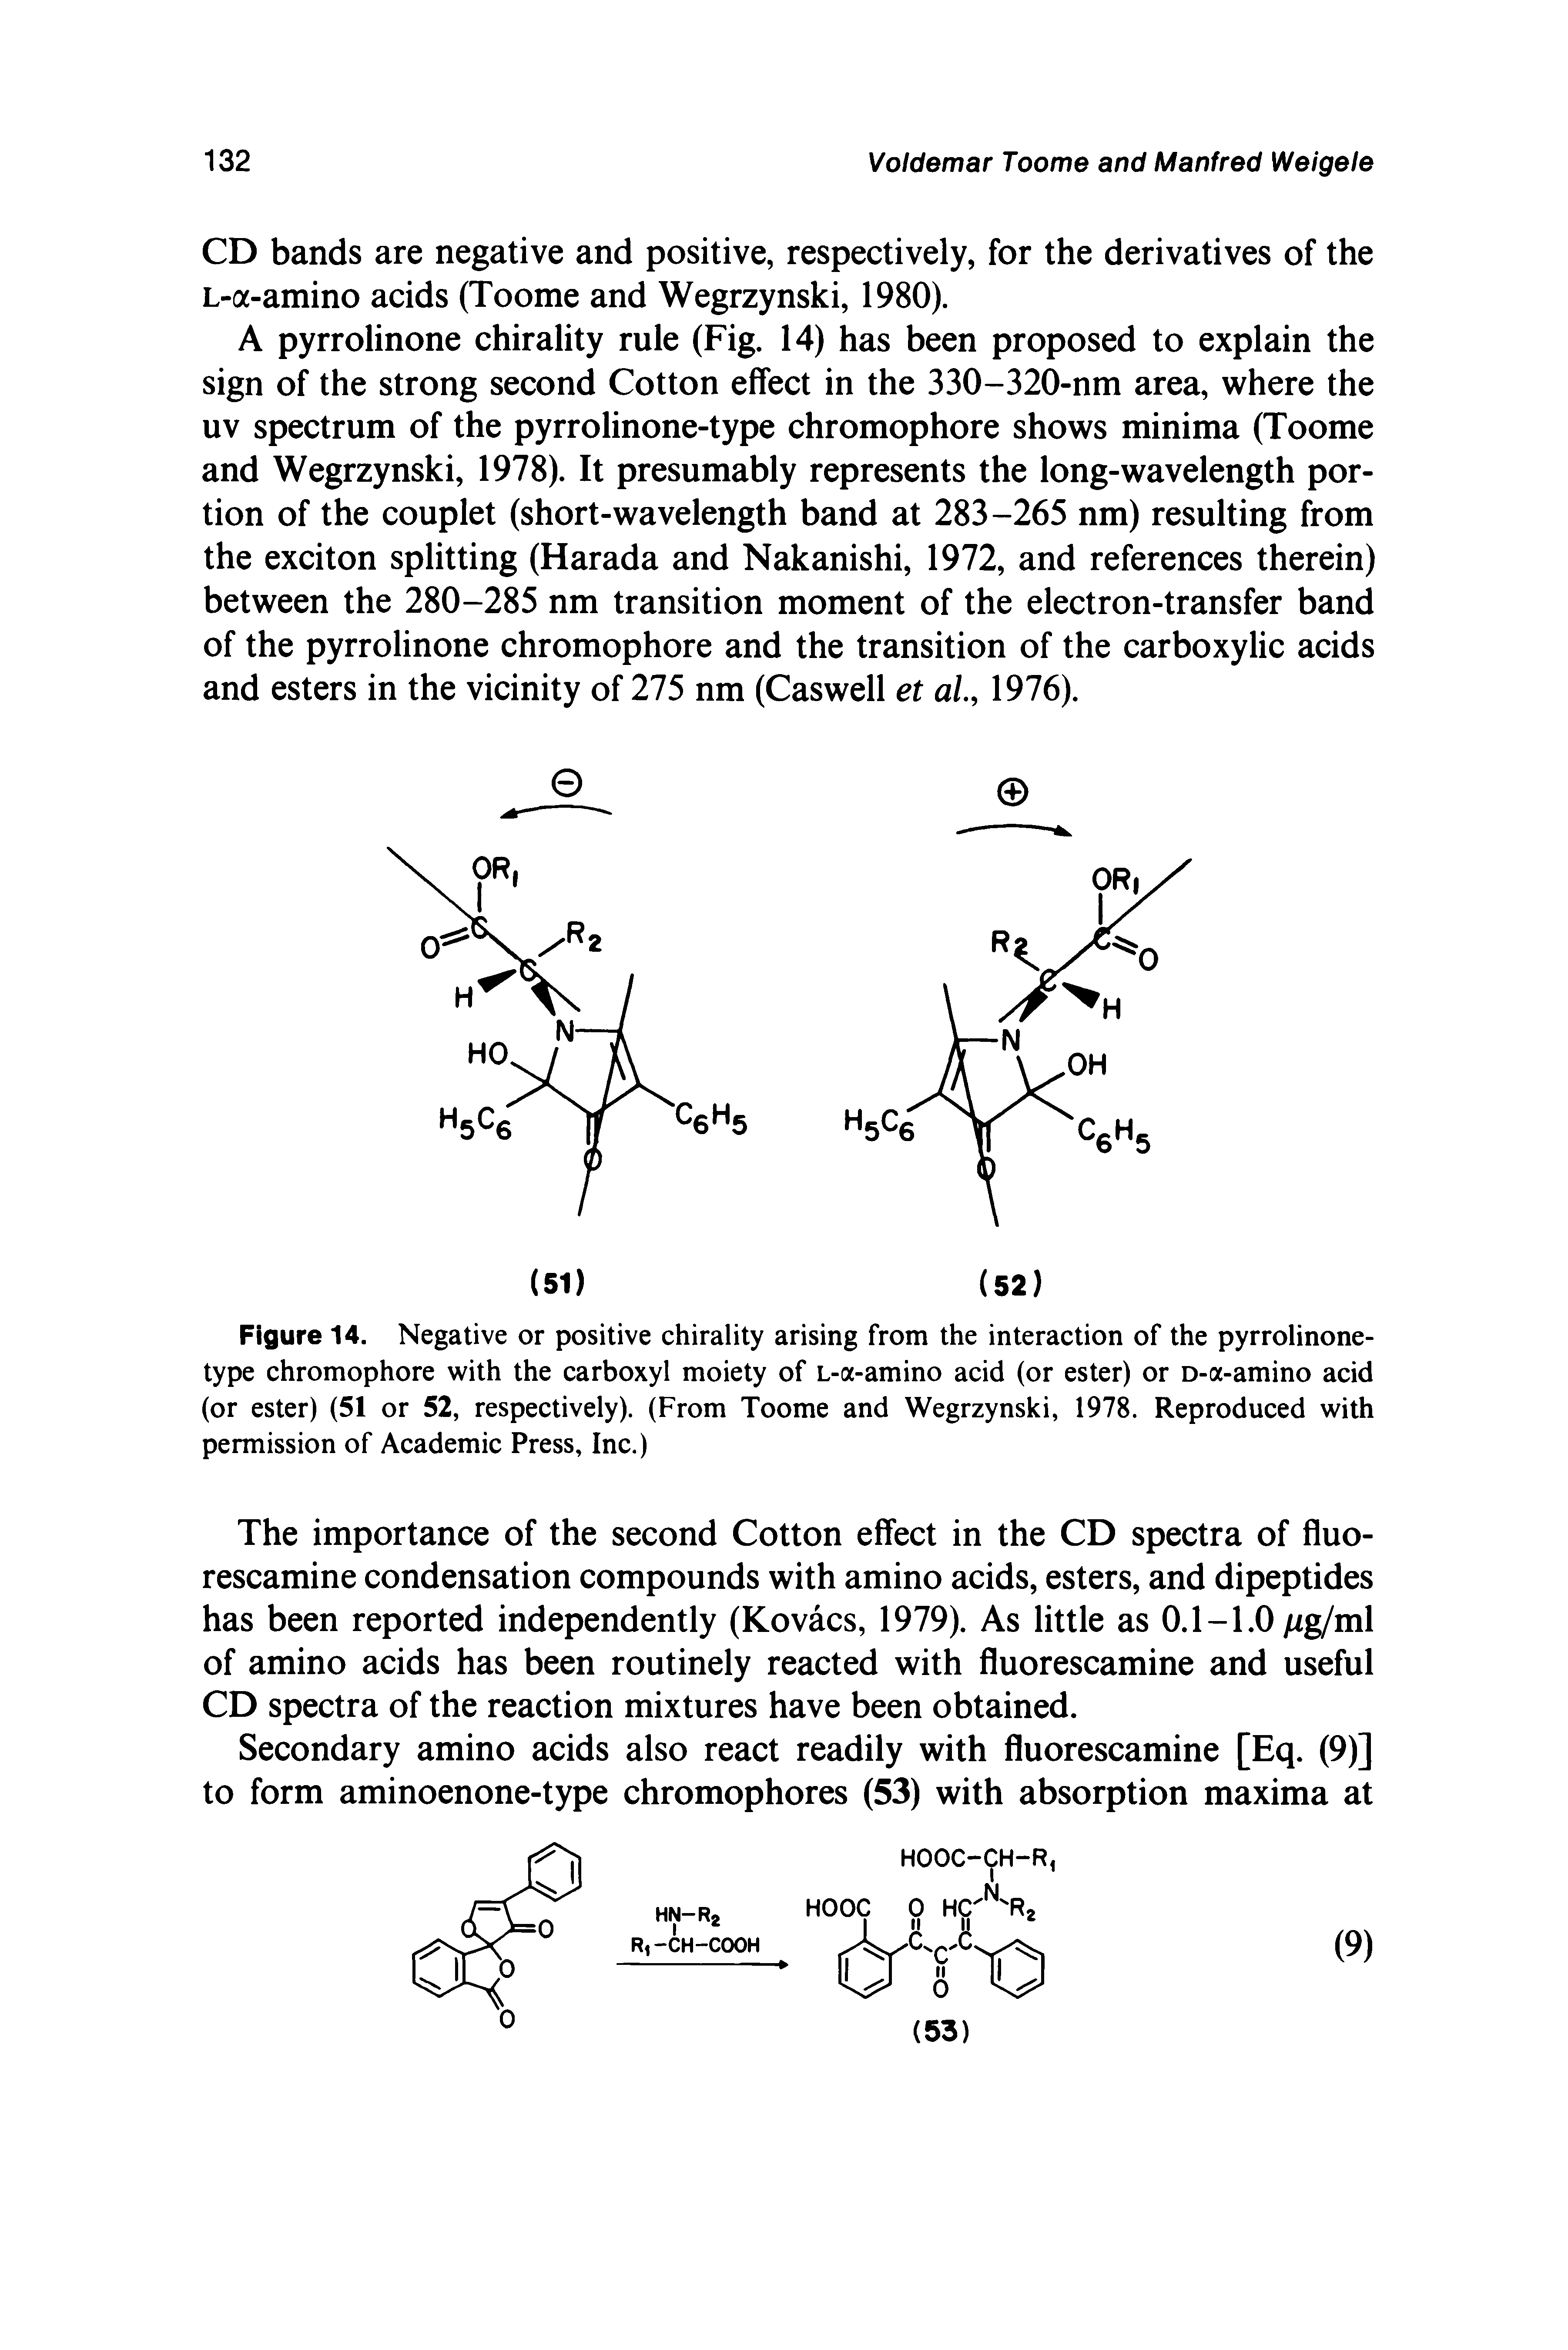 Figure 14. Negative or positive chirality arising from the interaction of the pyrrolinone-type chromophore with the carboxyl moiety of L-a-amino acid (or ester) or D-a-amino acid (or ester) (51 or 52, respectively). (From Toome and Wegrzynski, 1978. Reproduced with permission of Academic Press, Inc.)...